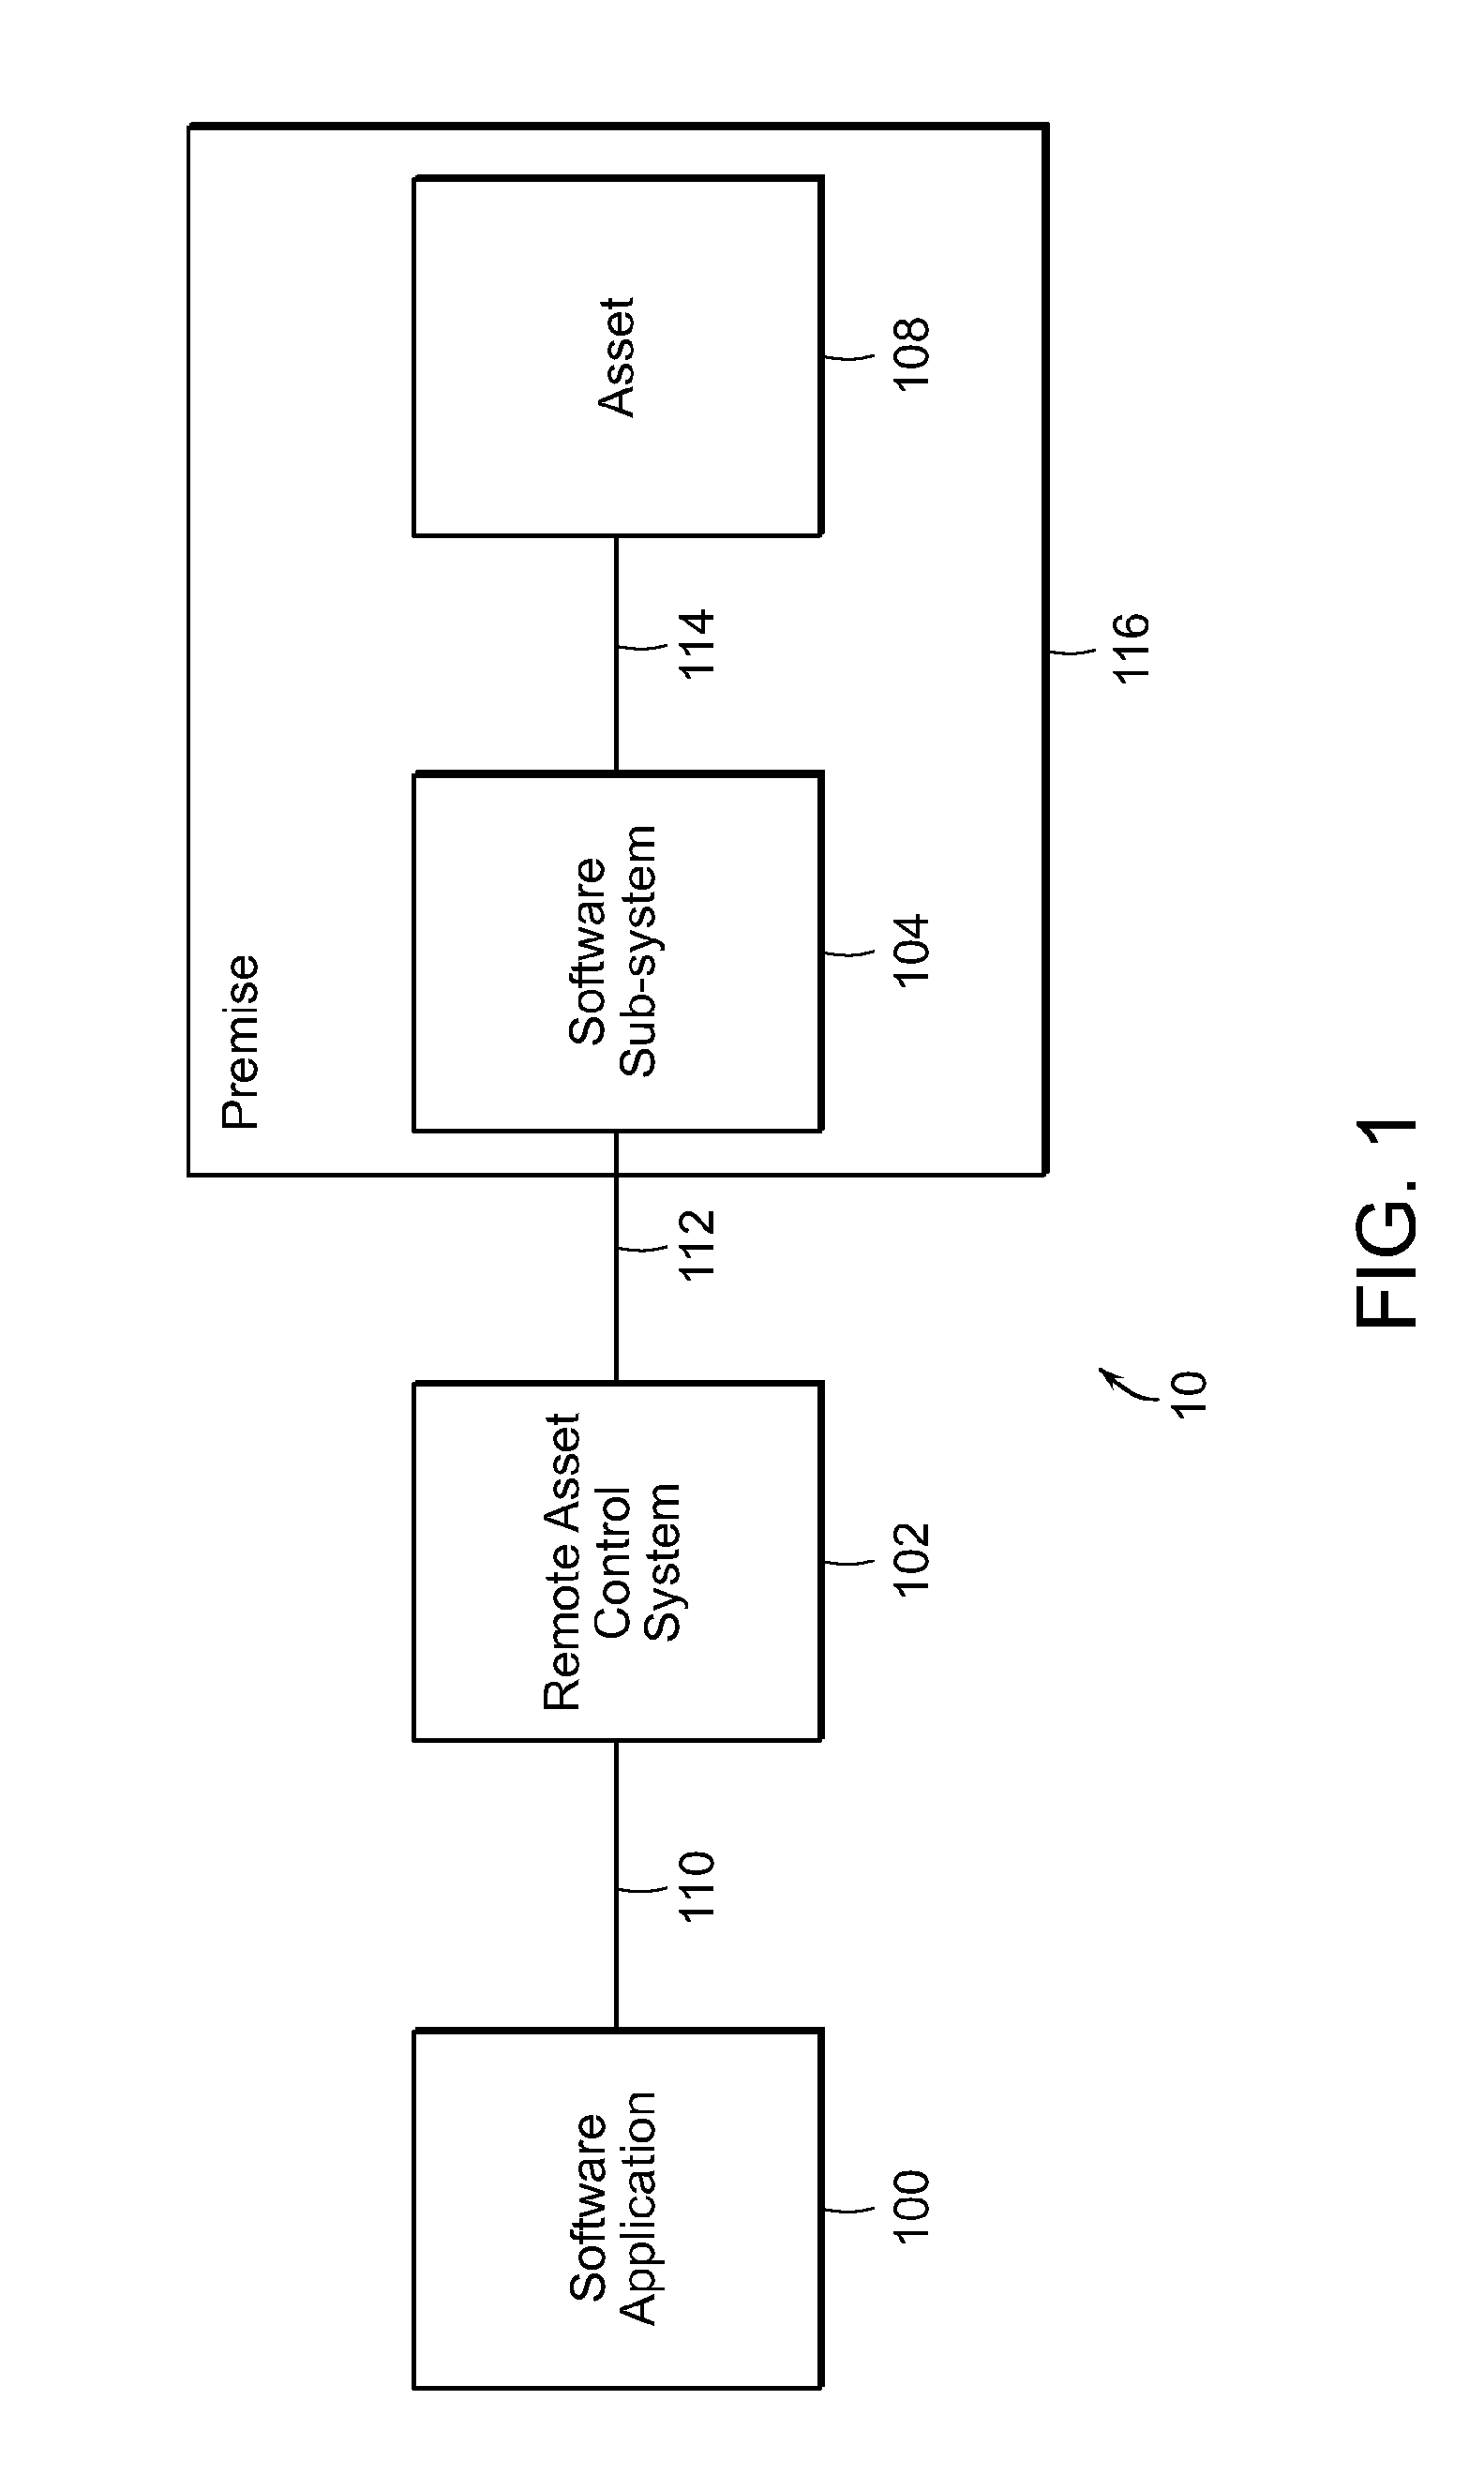 Remote asset control systems and methods